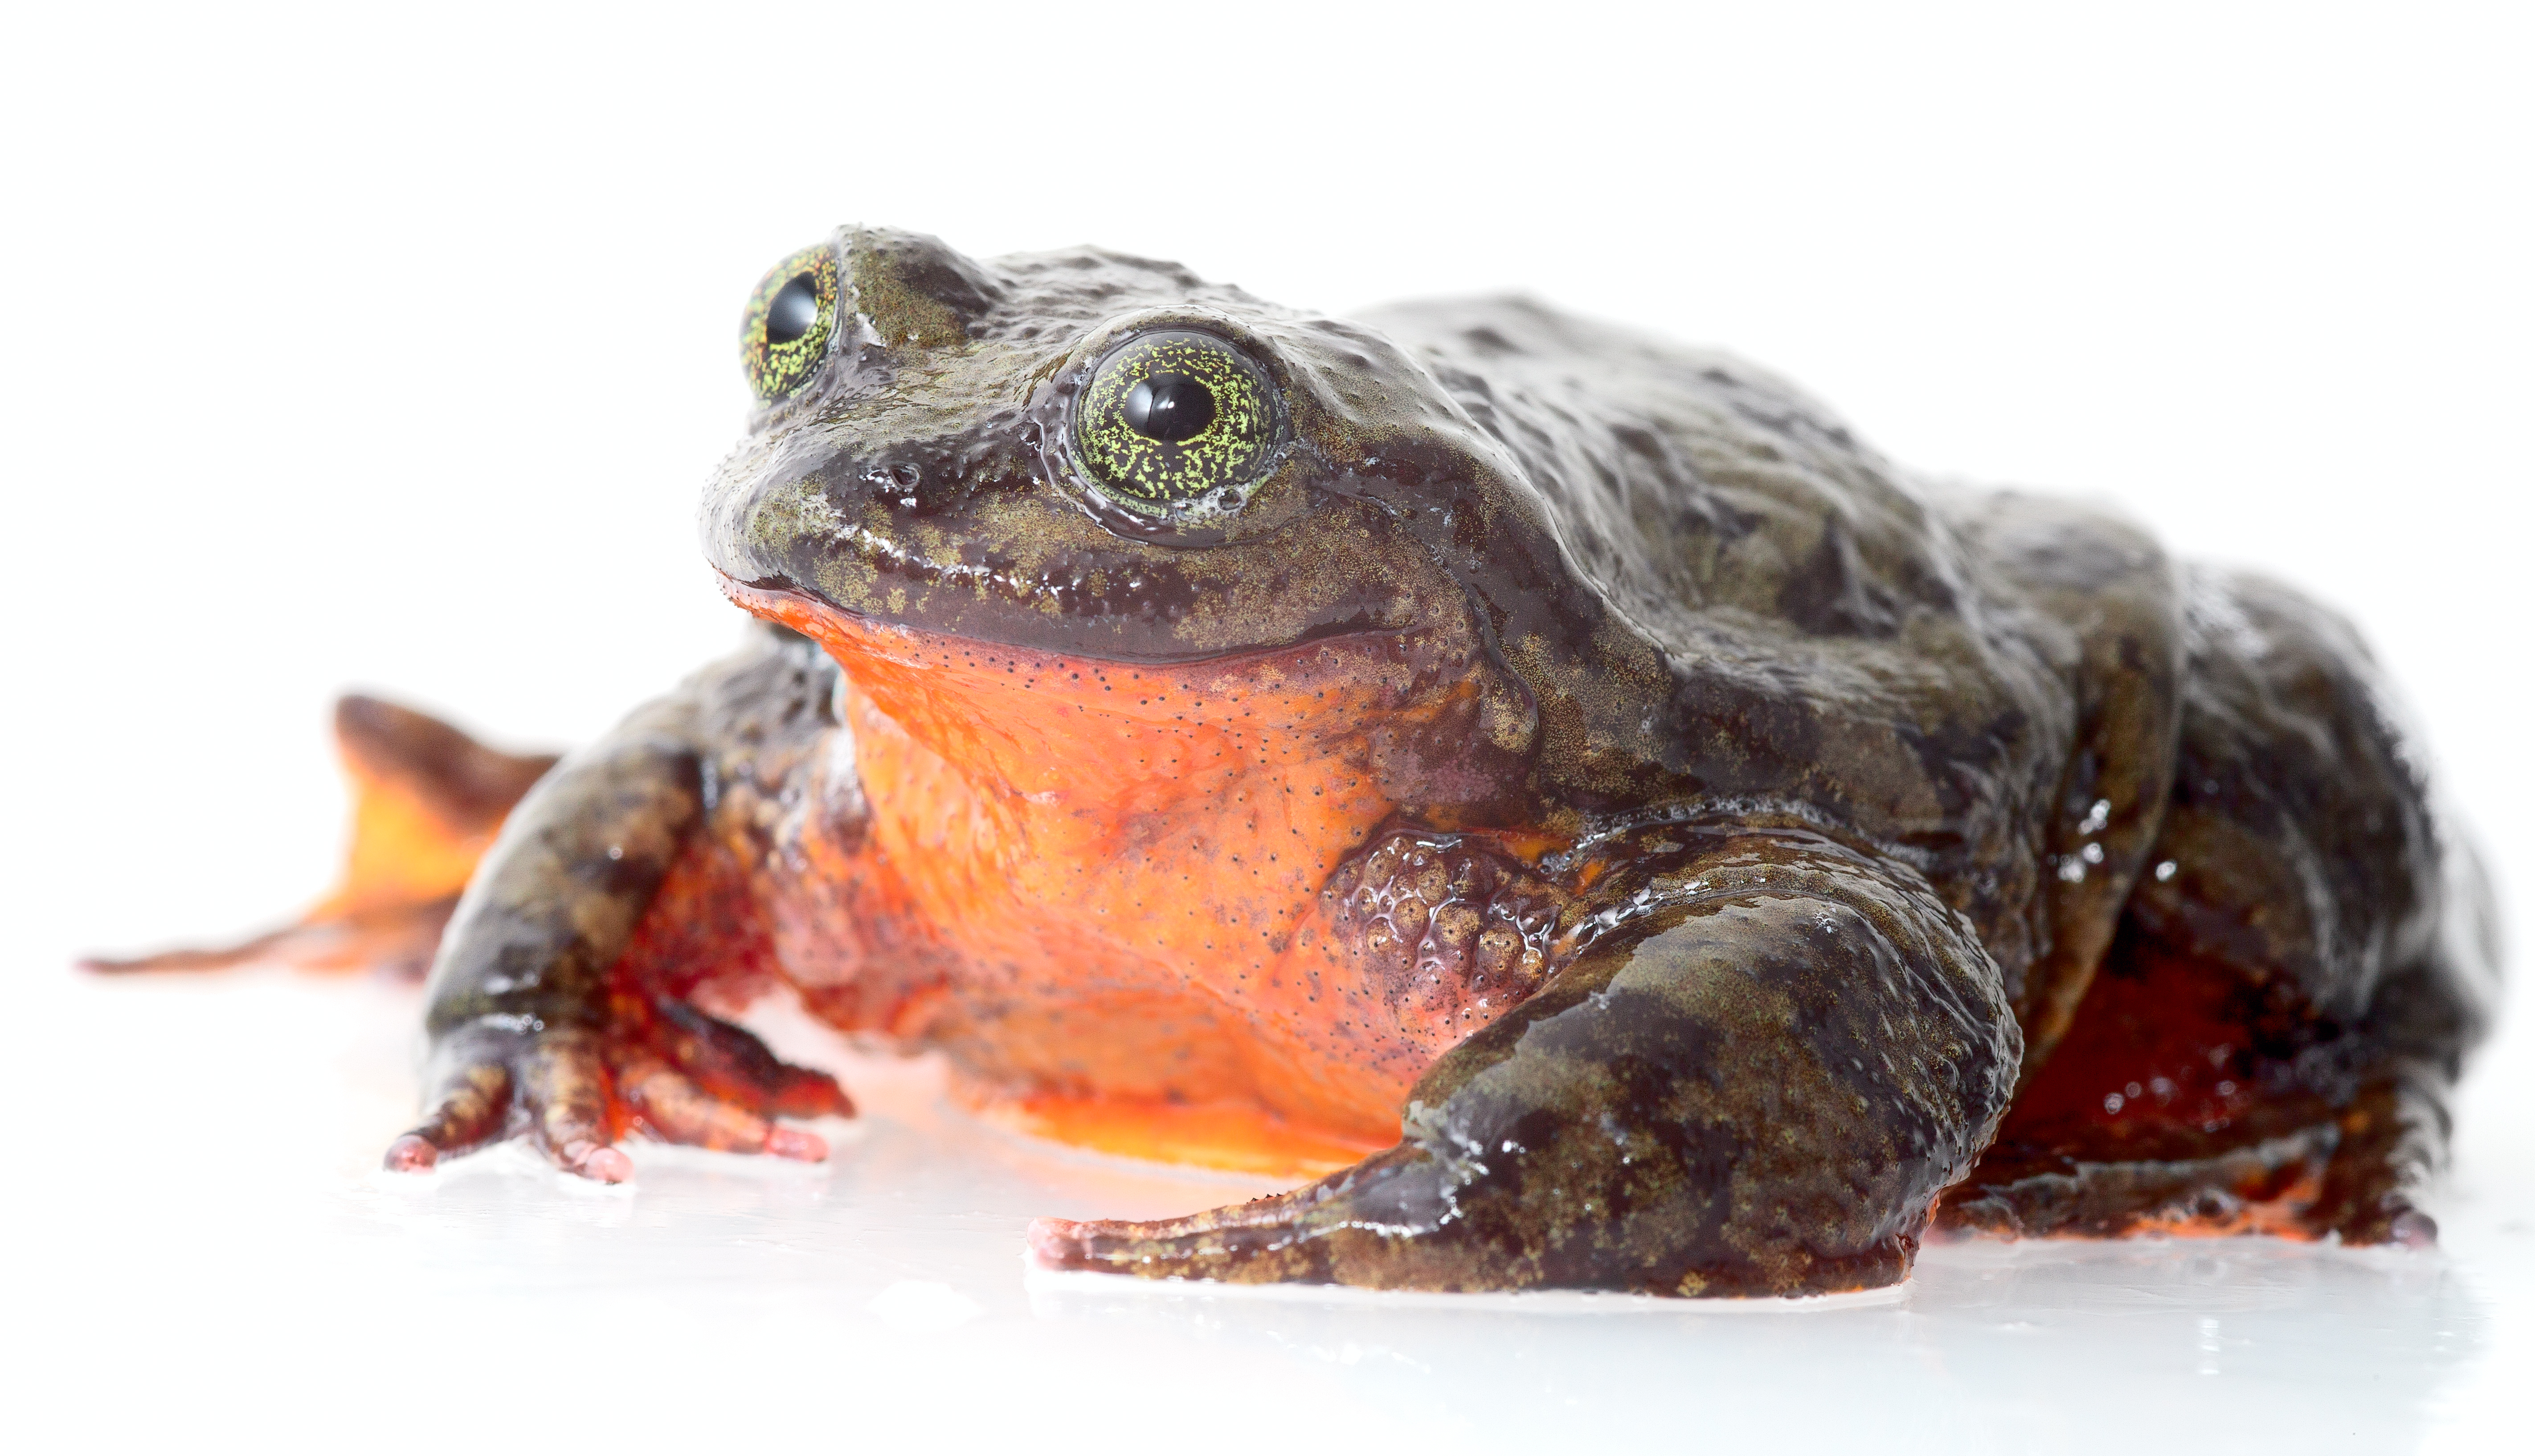 Finding a Mate for the World's Loneliest Frog - Global Wildlife ...